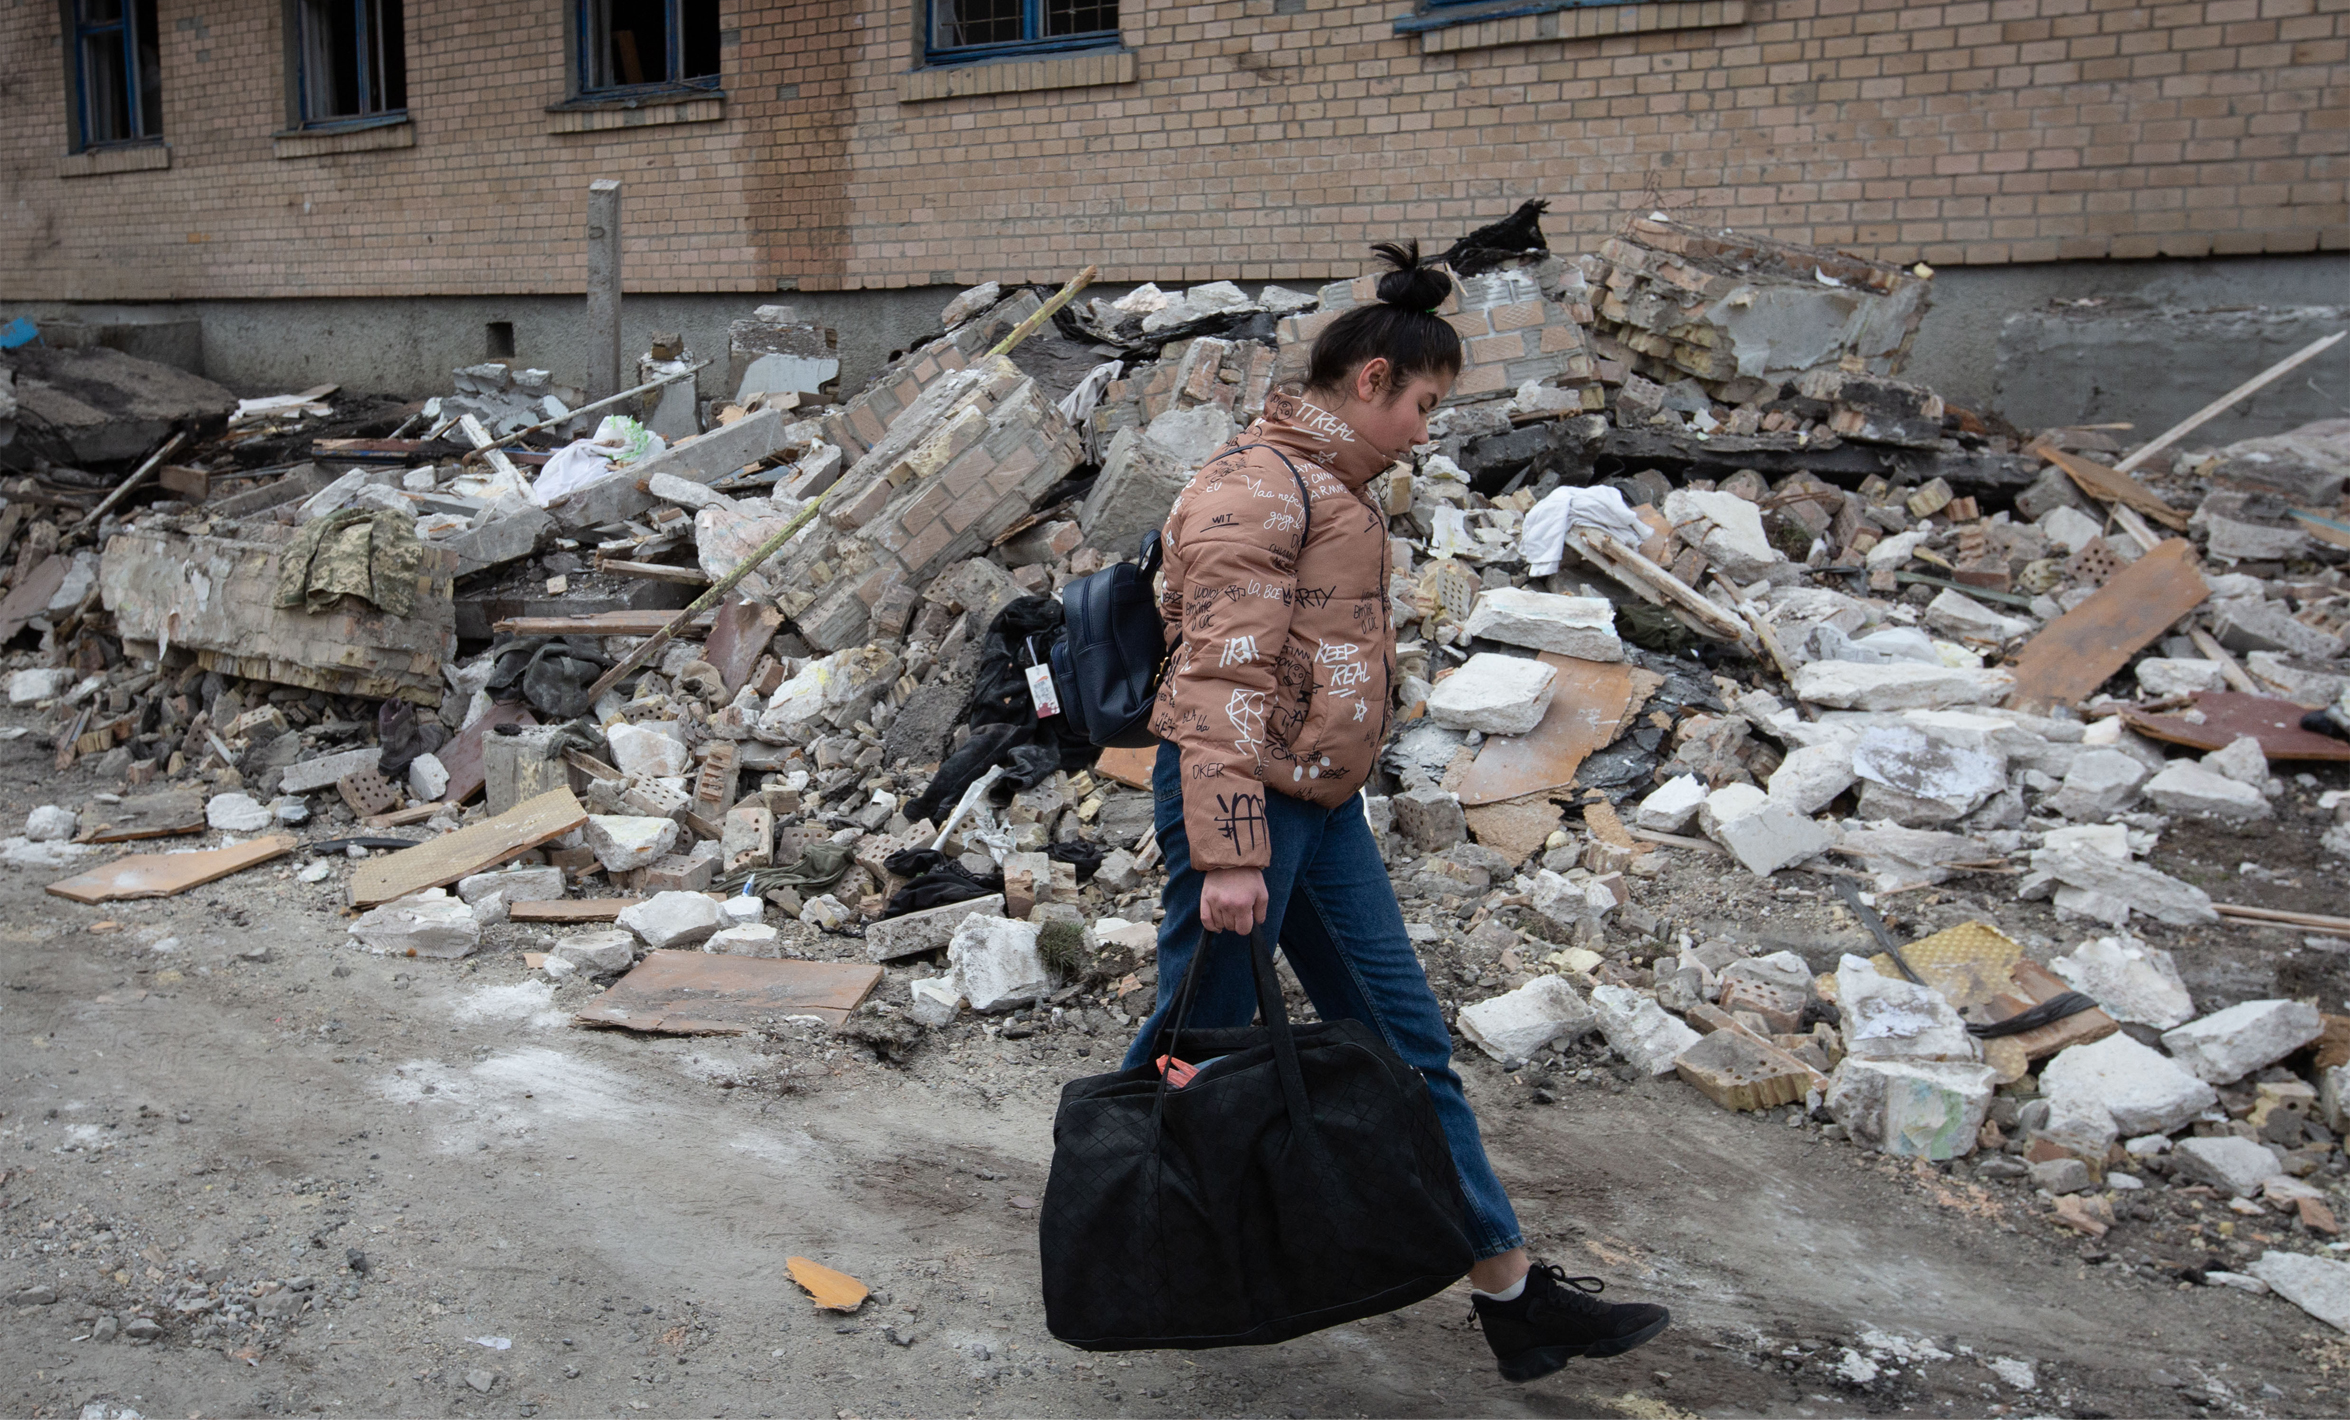 A local resident walks near a residential building destroyed by Russian drones attack in the town of Rzhyshchiv, Kyiv region, Ukraine on March 24, 2023. Photo by Oleksii Chumachenko/Anadolu Agency via Getty Images.